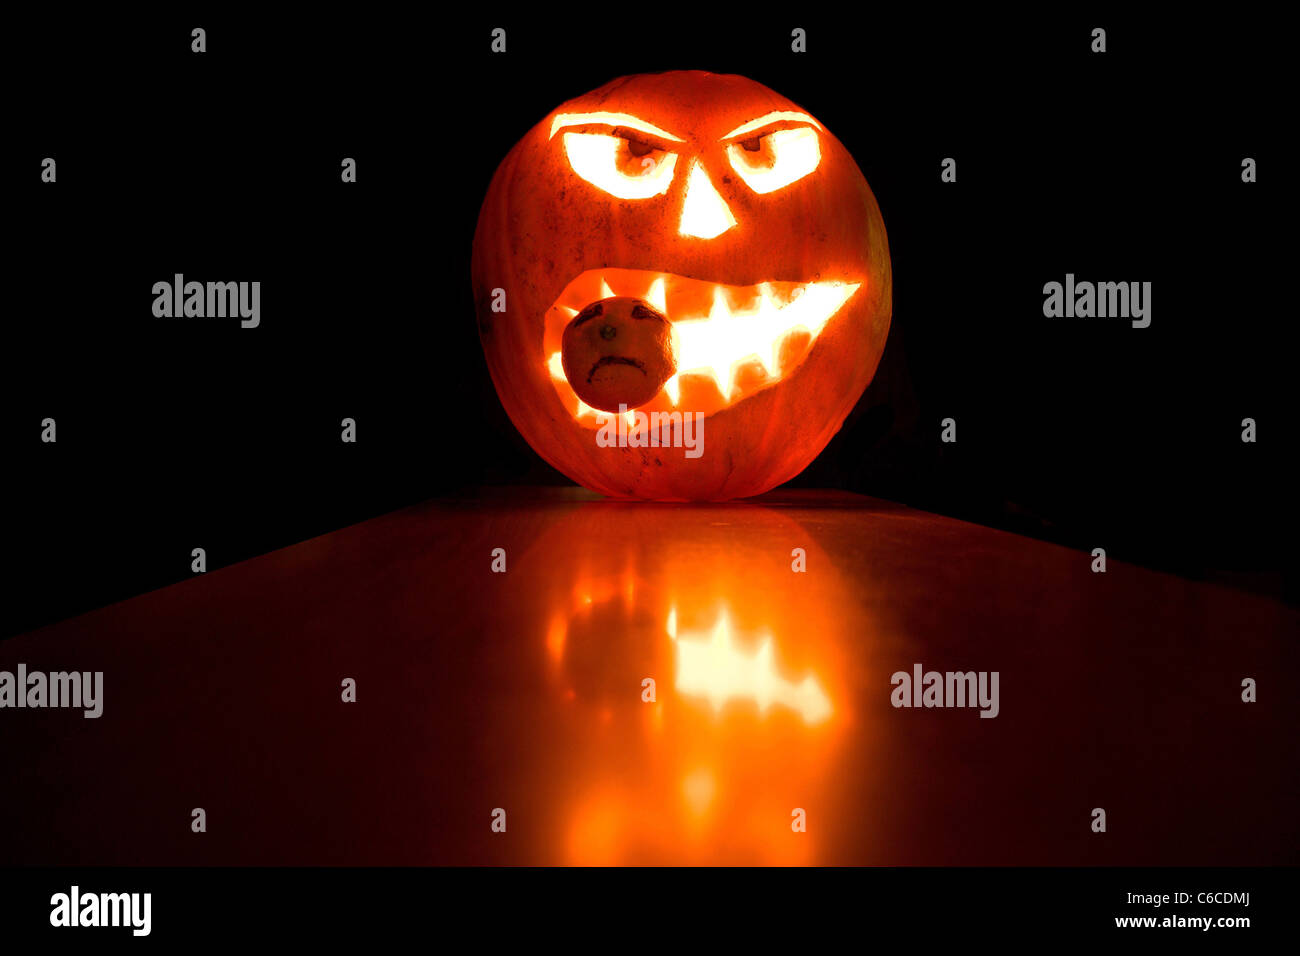 Halloween pumpkin light in the dark background, with reflections Stock Photo